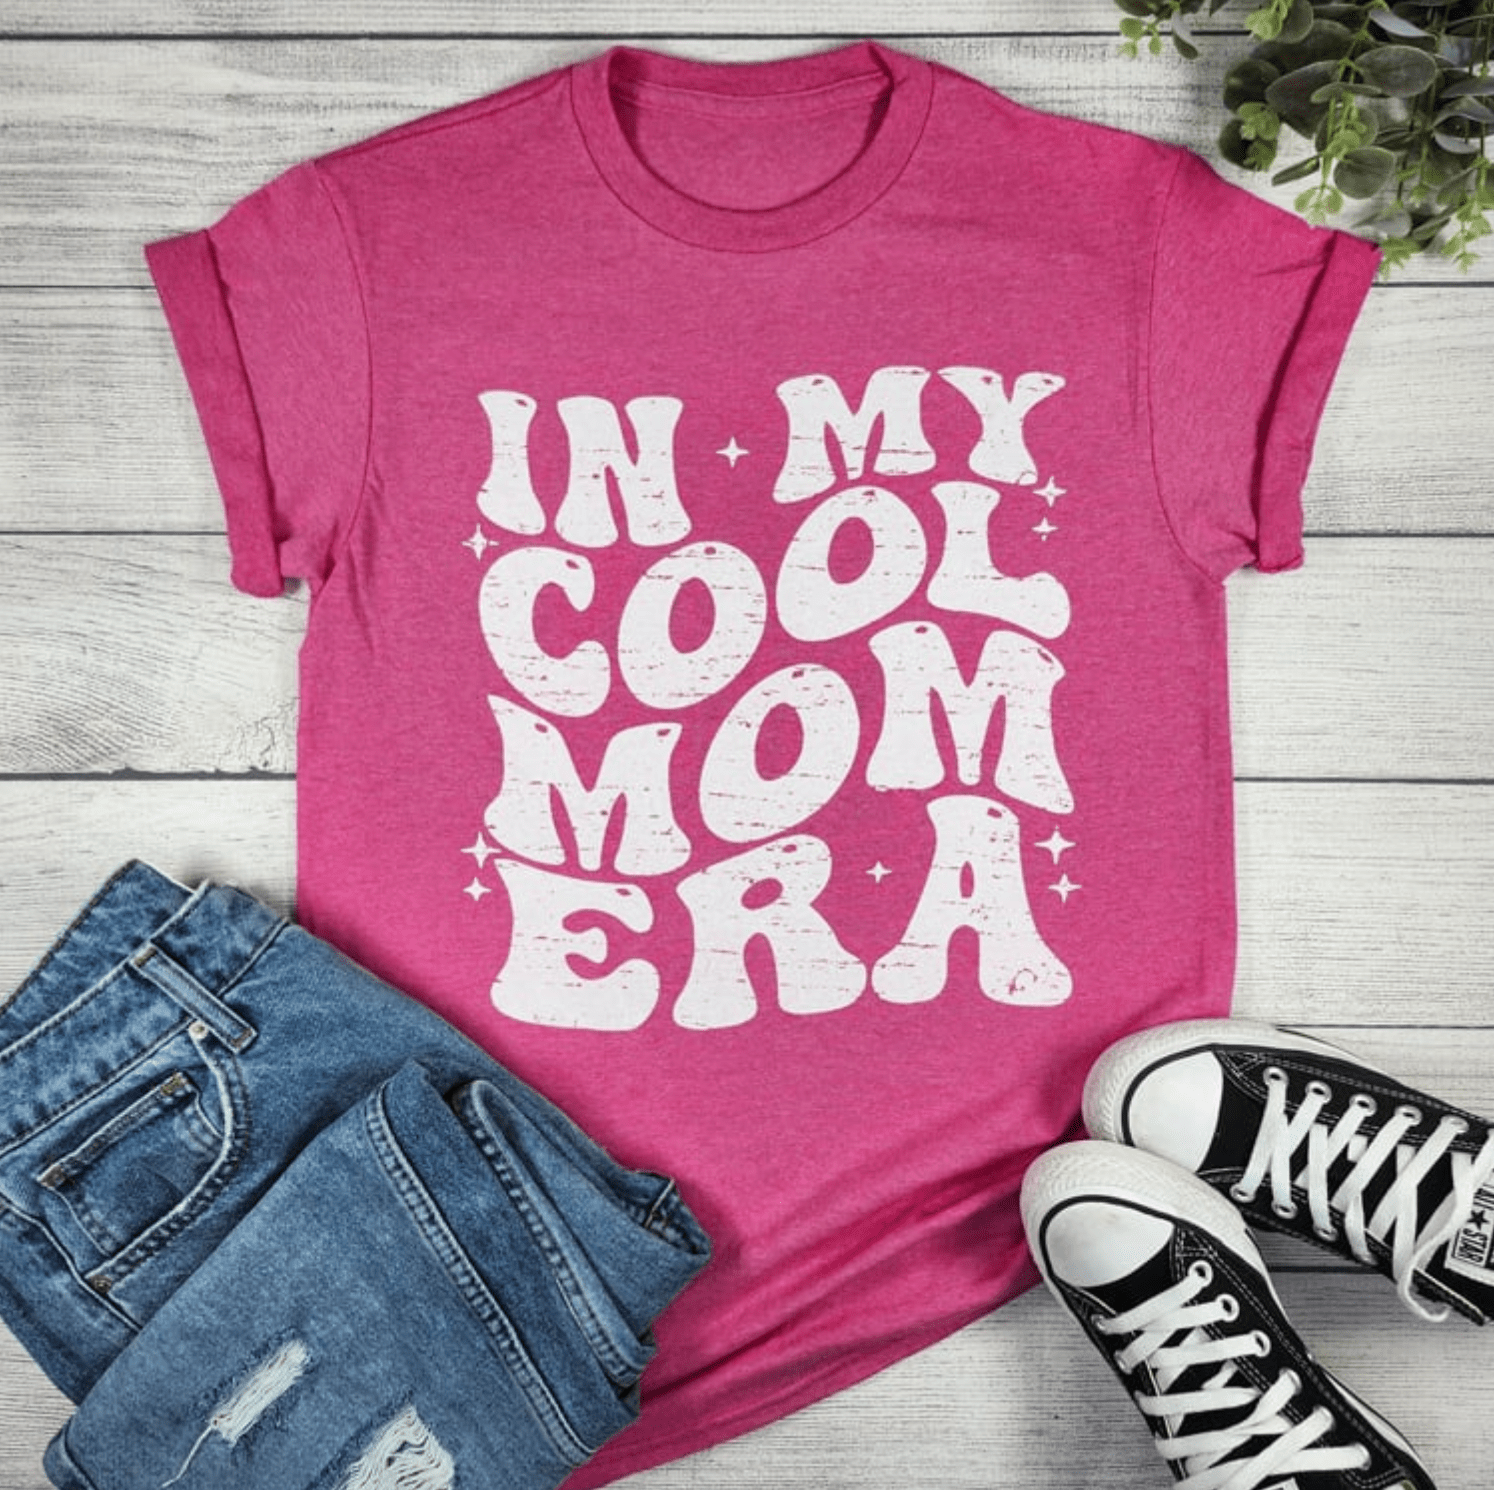 Envy Stylz Boutique Women - Apparel - Shirts - T-Shirts In My Cool Mom Era Graphic Tee